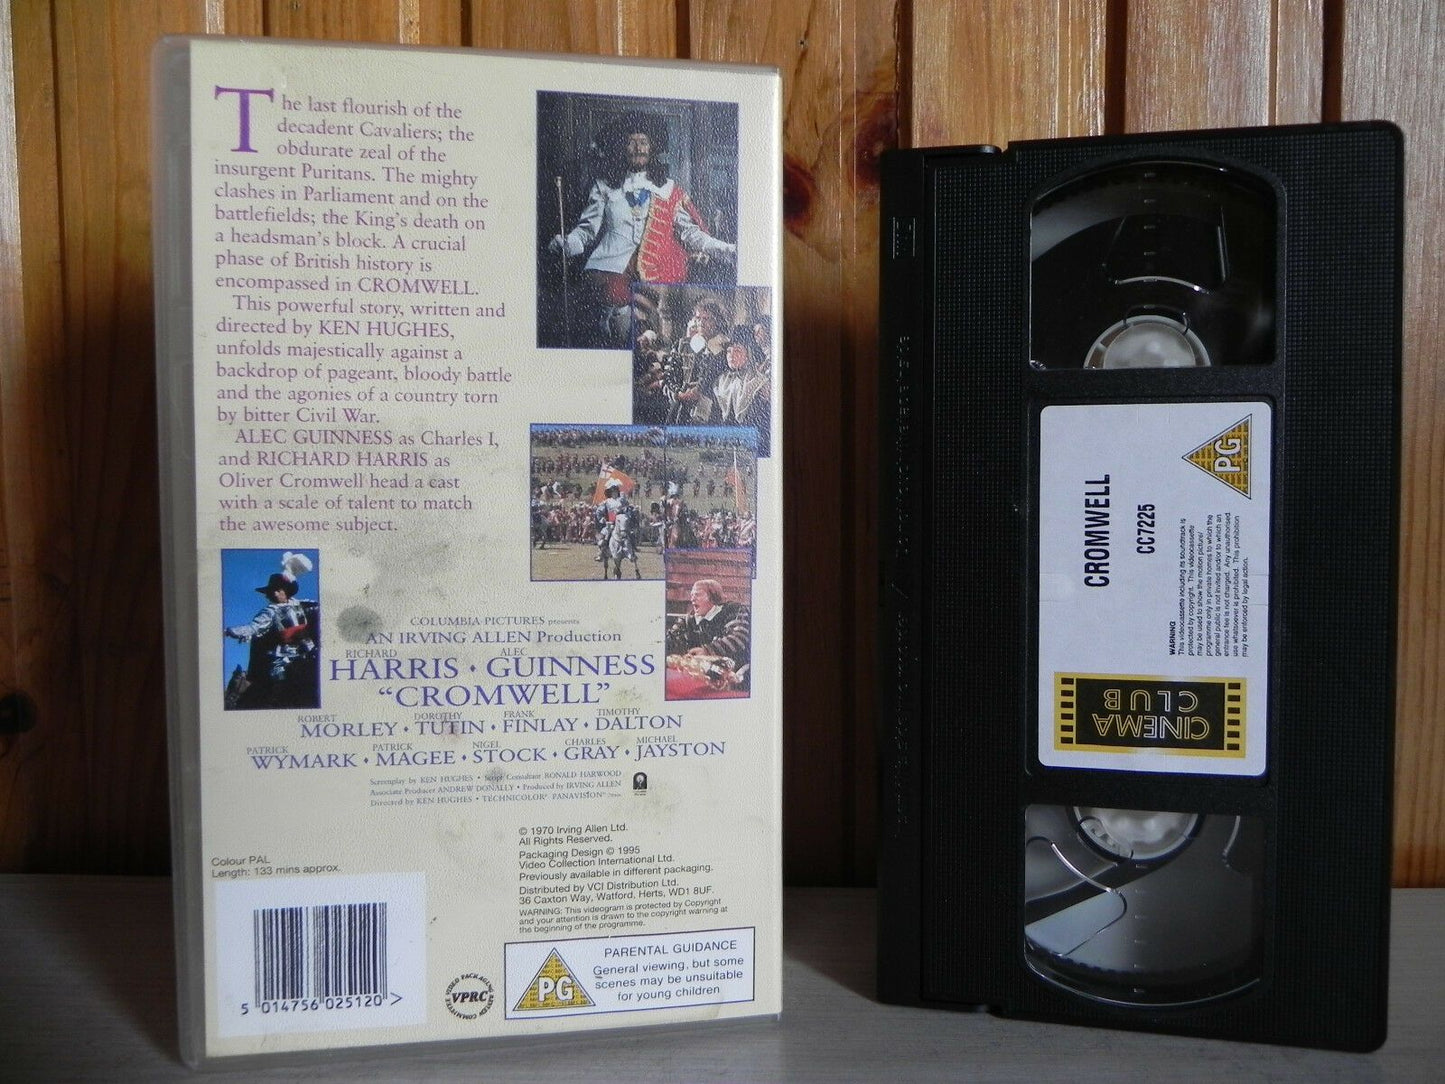 Cromwell - Columbia Pictures - War - Drama - Richard Harris - Alec Guiness - VHS-